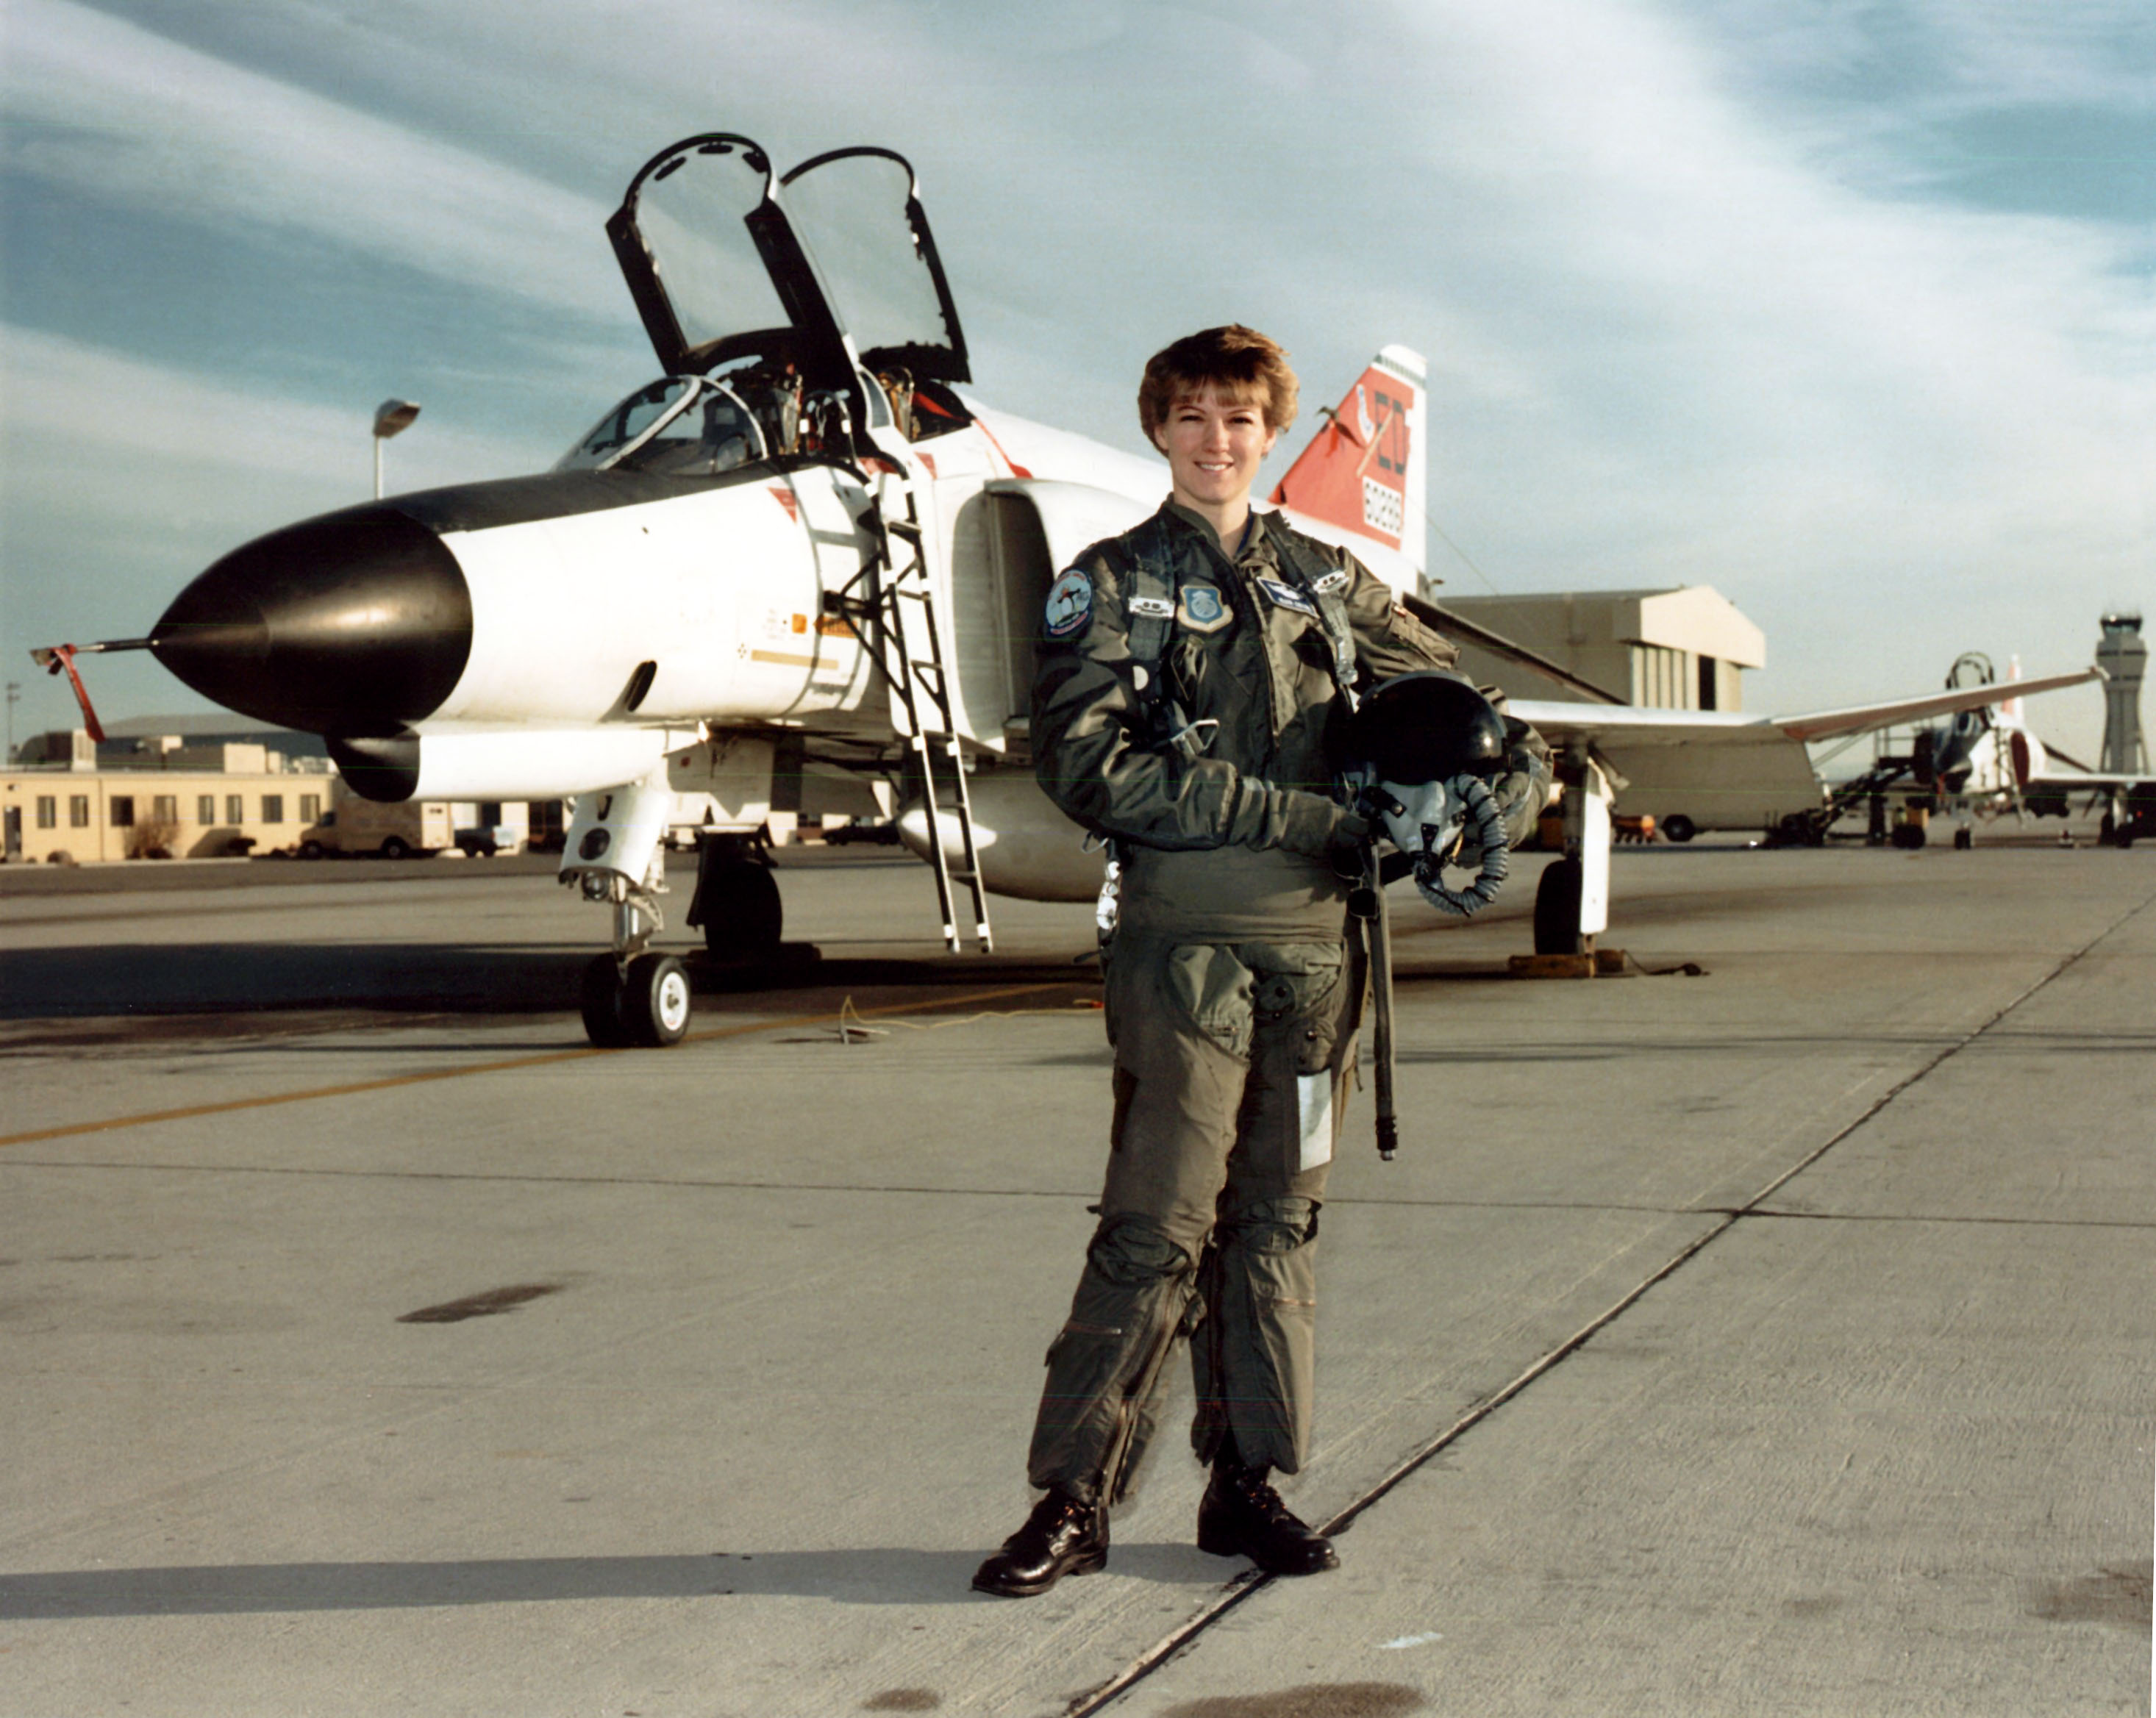 Major Eileen M. Collins, U.S. Air Force, with McDonnell F-4E-31-MC Phantom II 66-0289, at Edwards AFB, 1990. (U.S. Air Force)